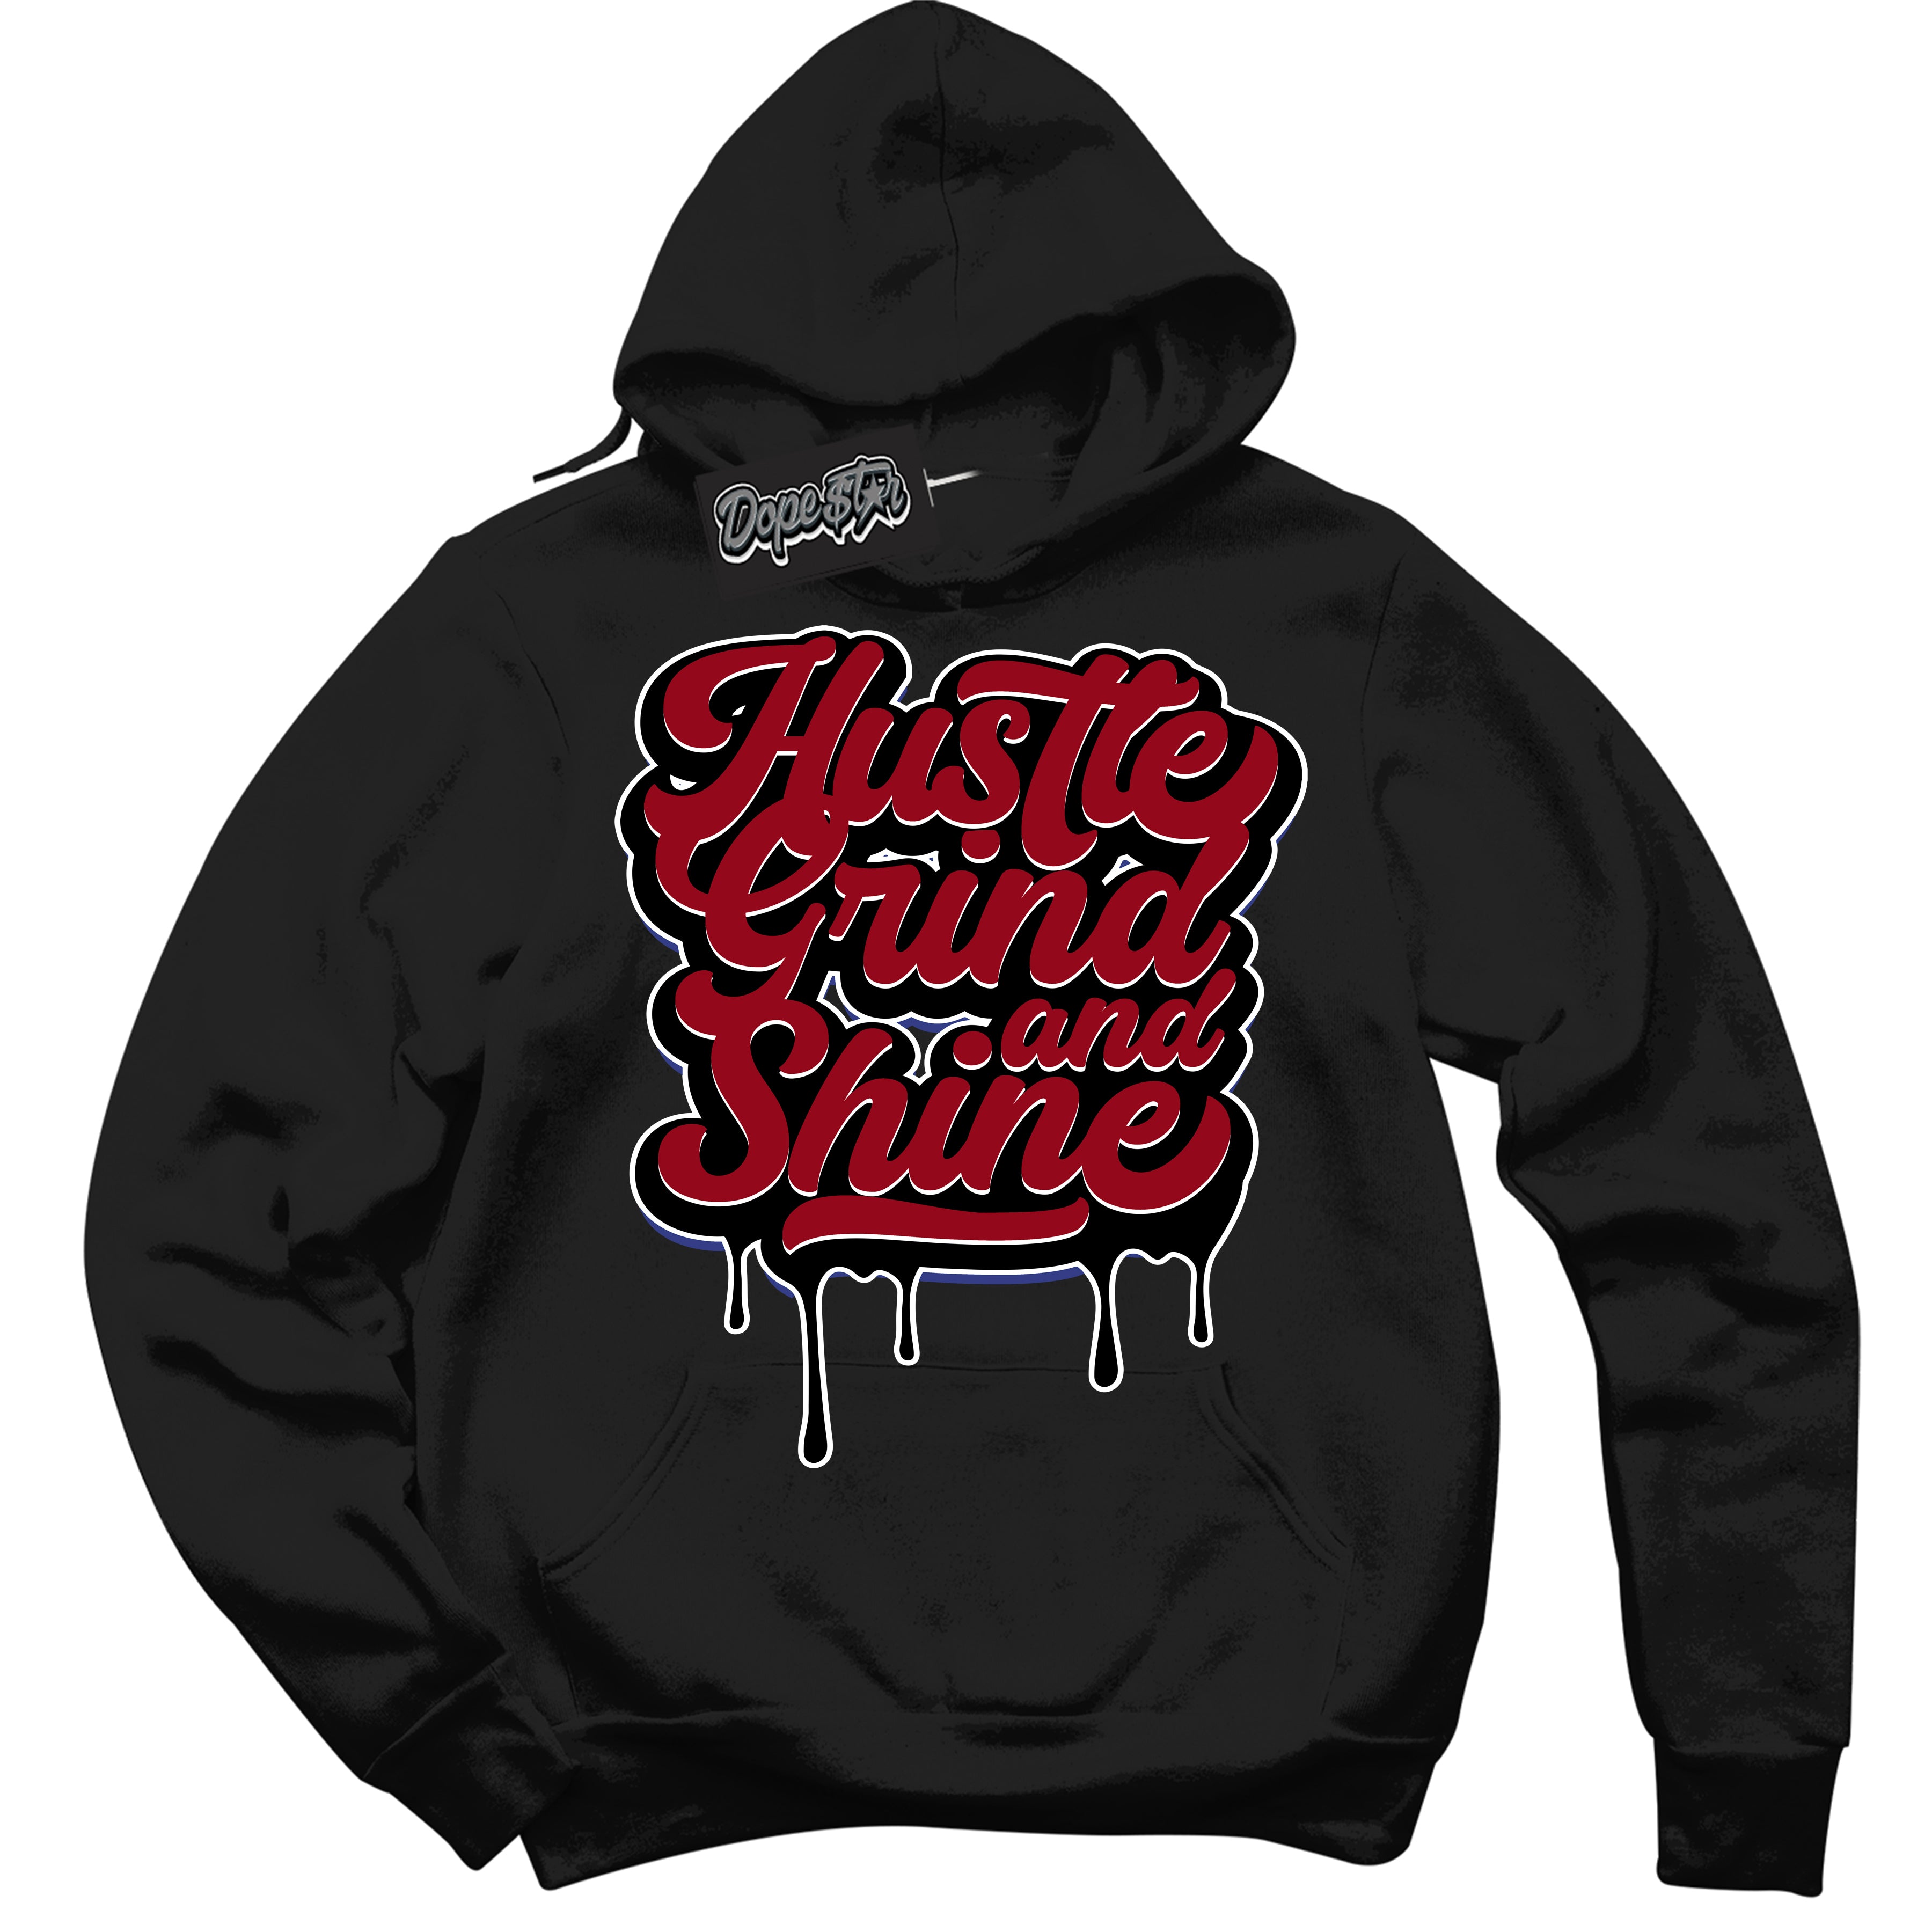 Cool Black Hoodie with “ Hustle Grind And Shine ”  design that Perfectly Matches Playoffs 8s Sneakers.